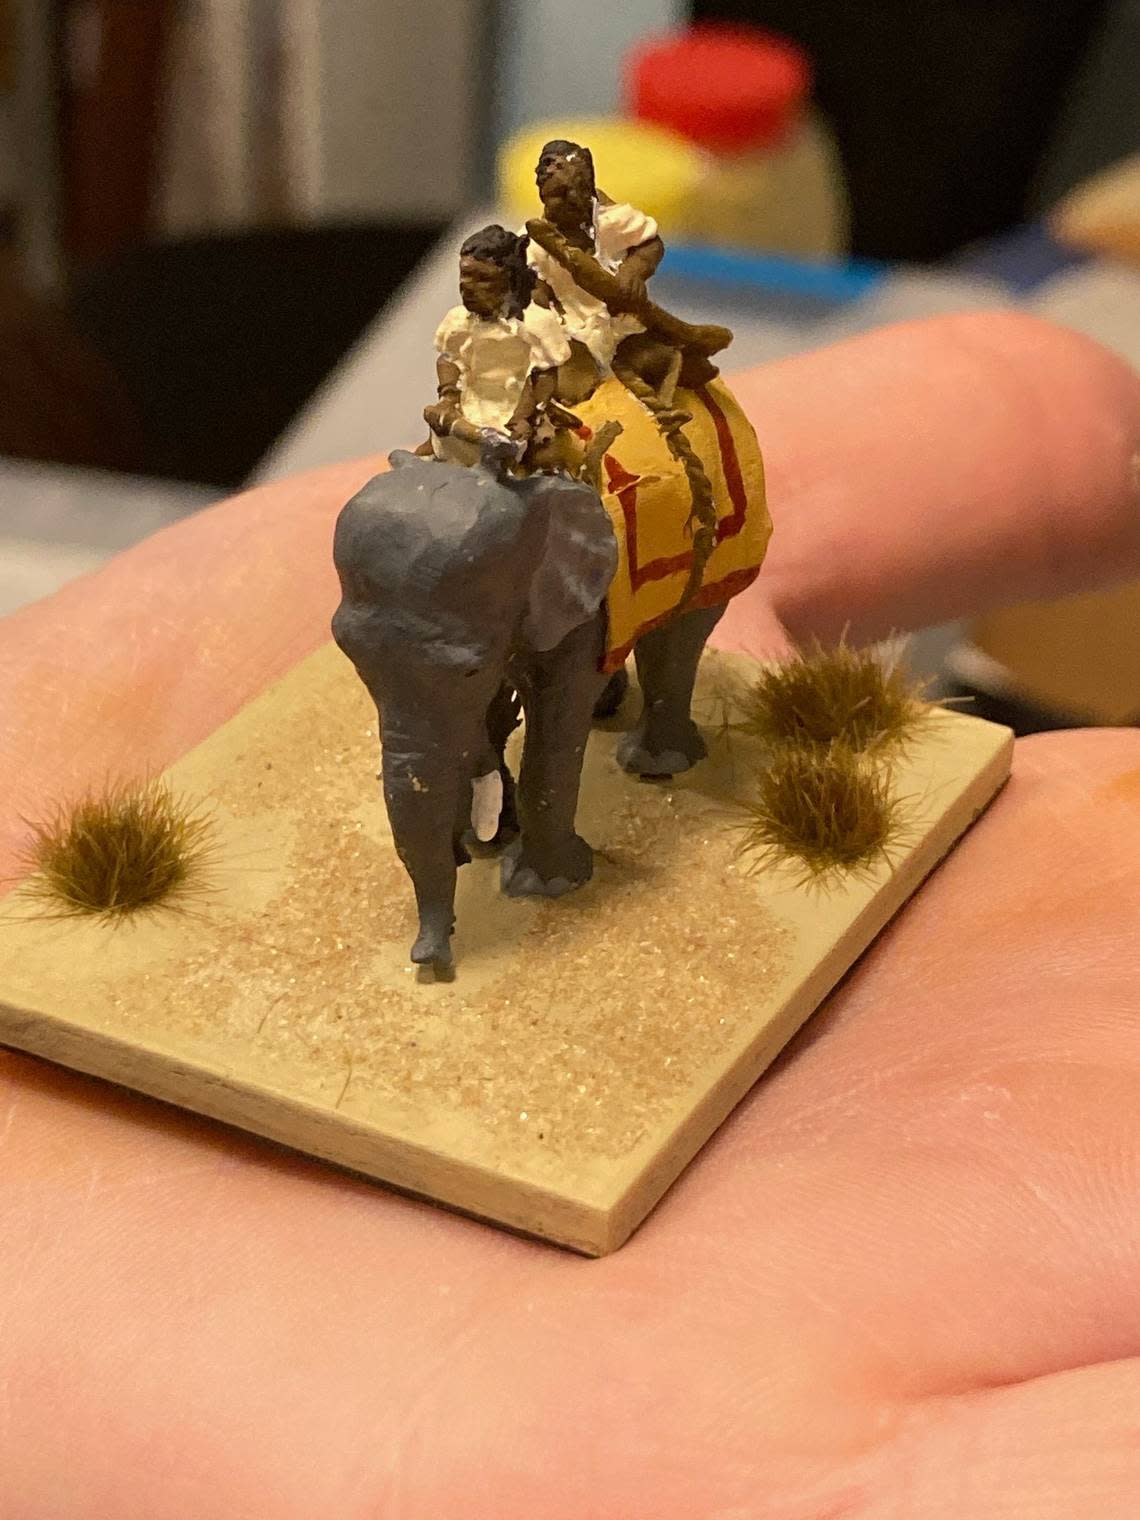 In miniature, this elephant, painted by a former Baker University student, is an overwhelming war-gaming force on the battlefields of the fourth century.